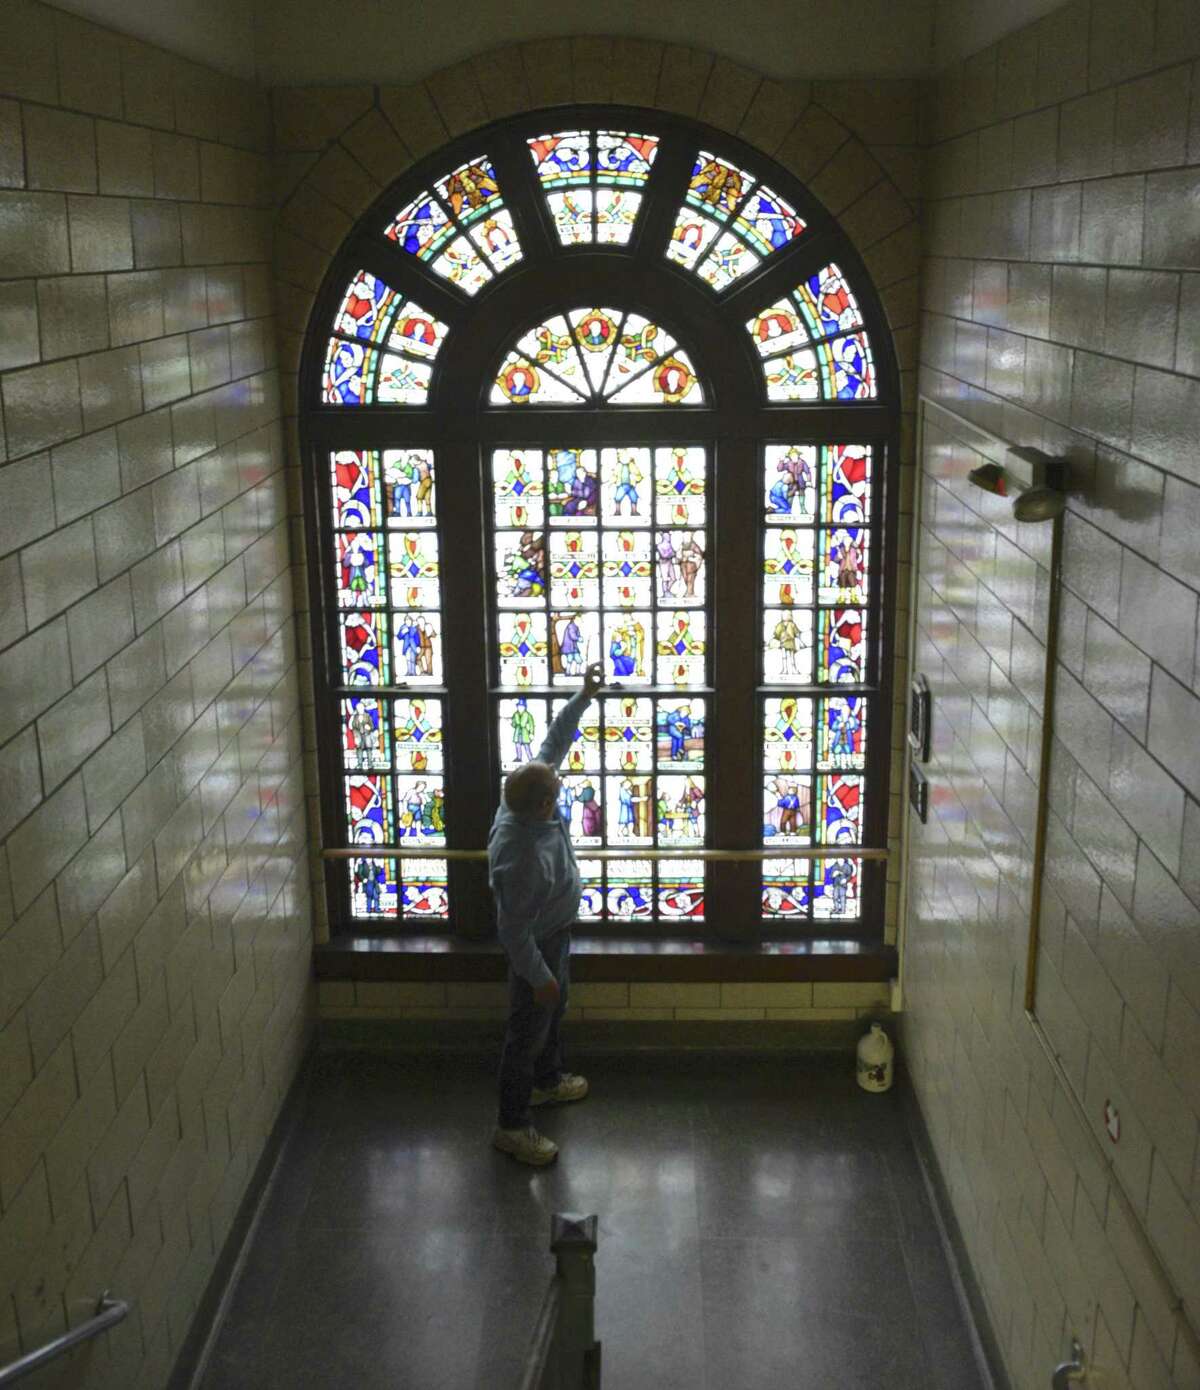 David Lawson, chairman of the Board of Education, points out section of a stained glass window, by Len R. Howard, in the old high school building, now known as the Lillis Administration building. The project was commissioned by the WPA's Federal Arts Program in 1936. New Milford is using a grant to have a consultant study the best way to use the East Street building.